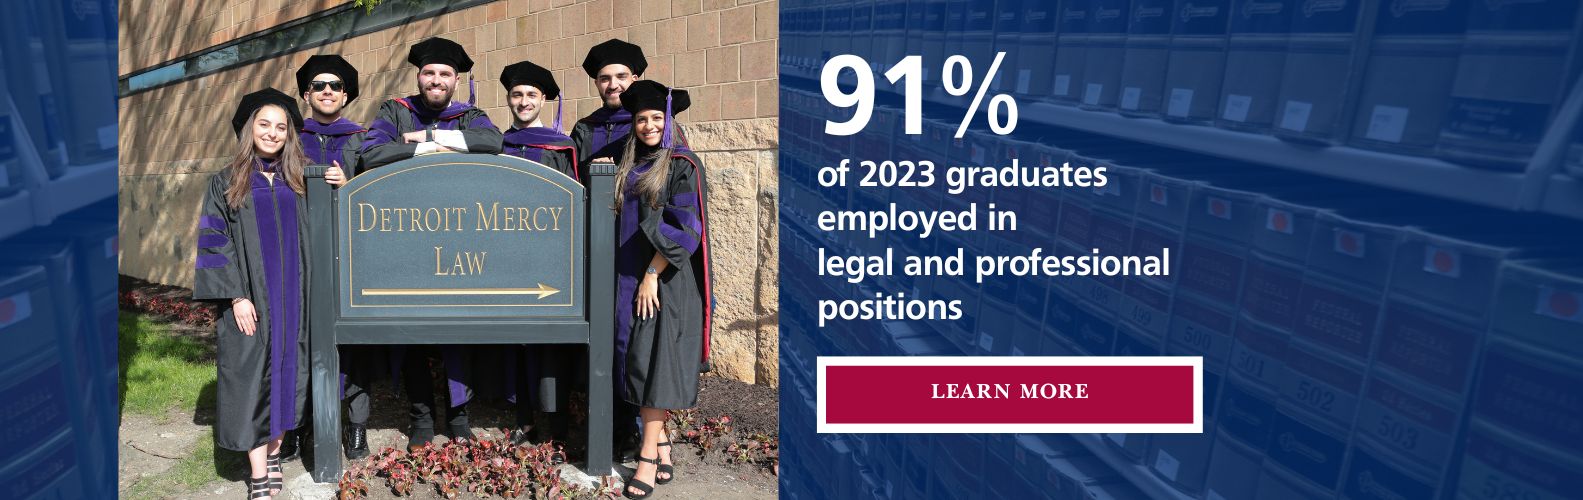 90% of 2021 graduates employed in legal positions